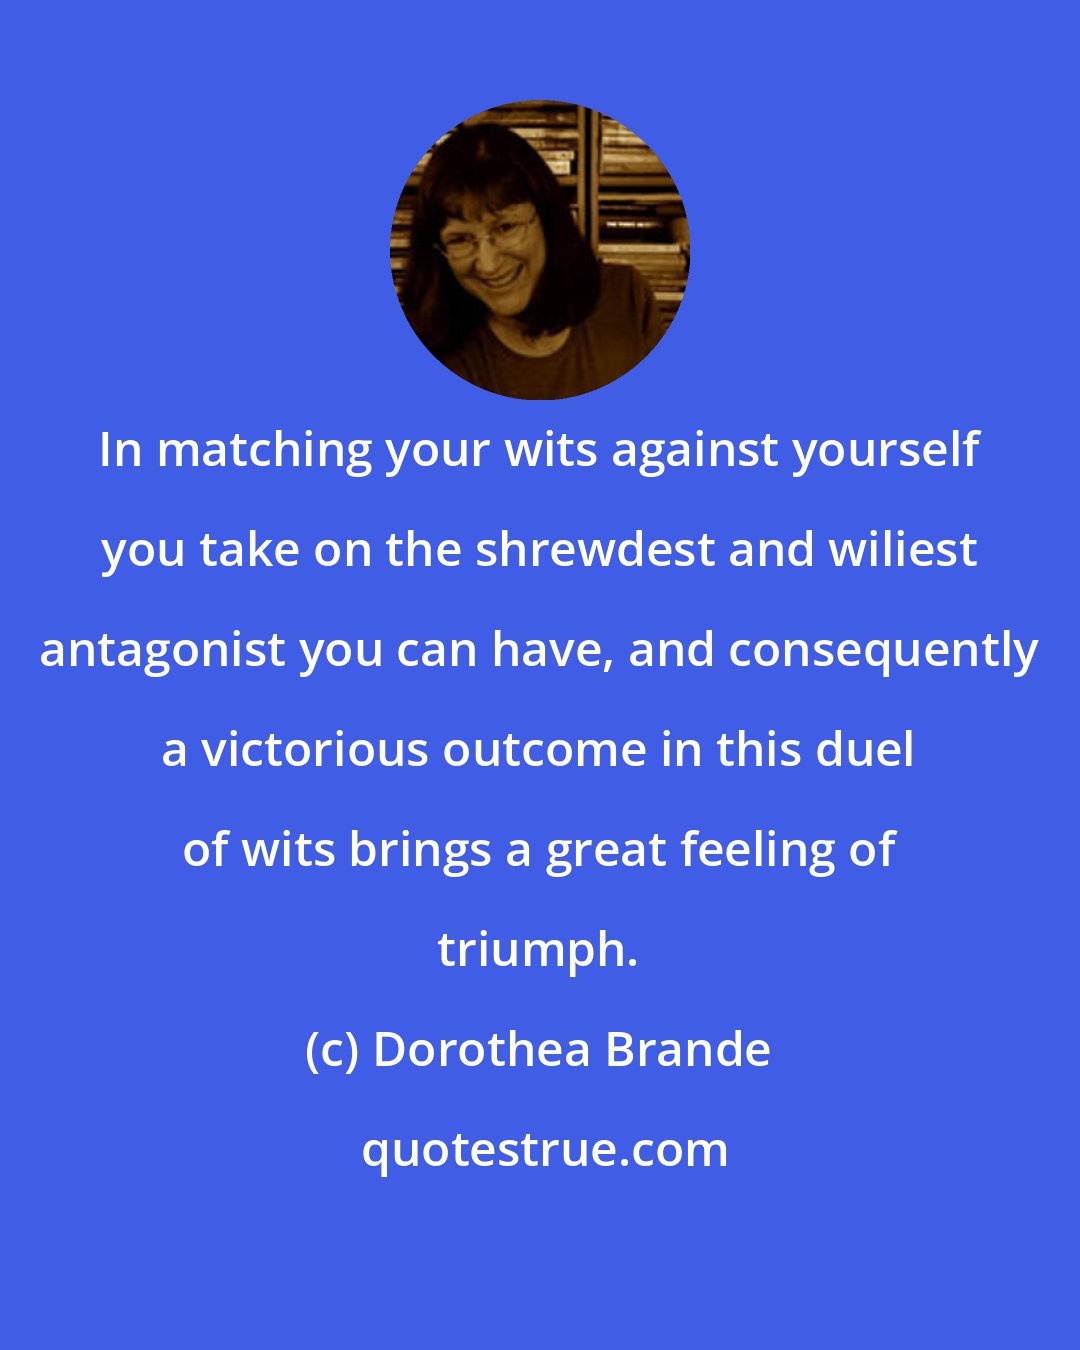 Dorothea Brande: In matching your wits against yourself you take on the shrewdest and wiliest antagonist you can have, and consequently a victorious outcome in this duel of wits brings a great feeling of triumph.